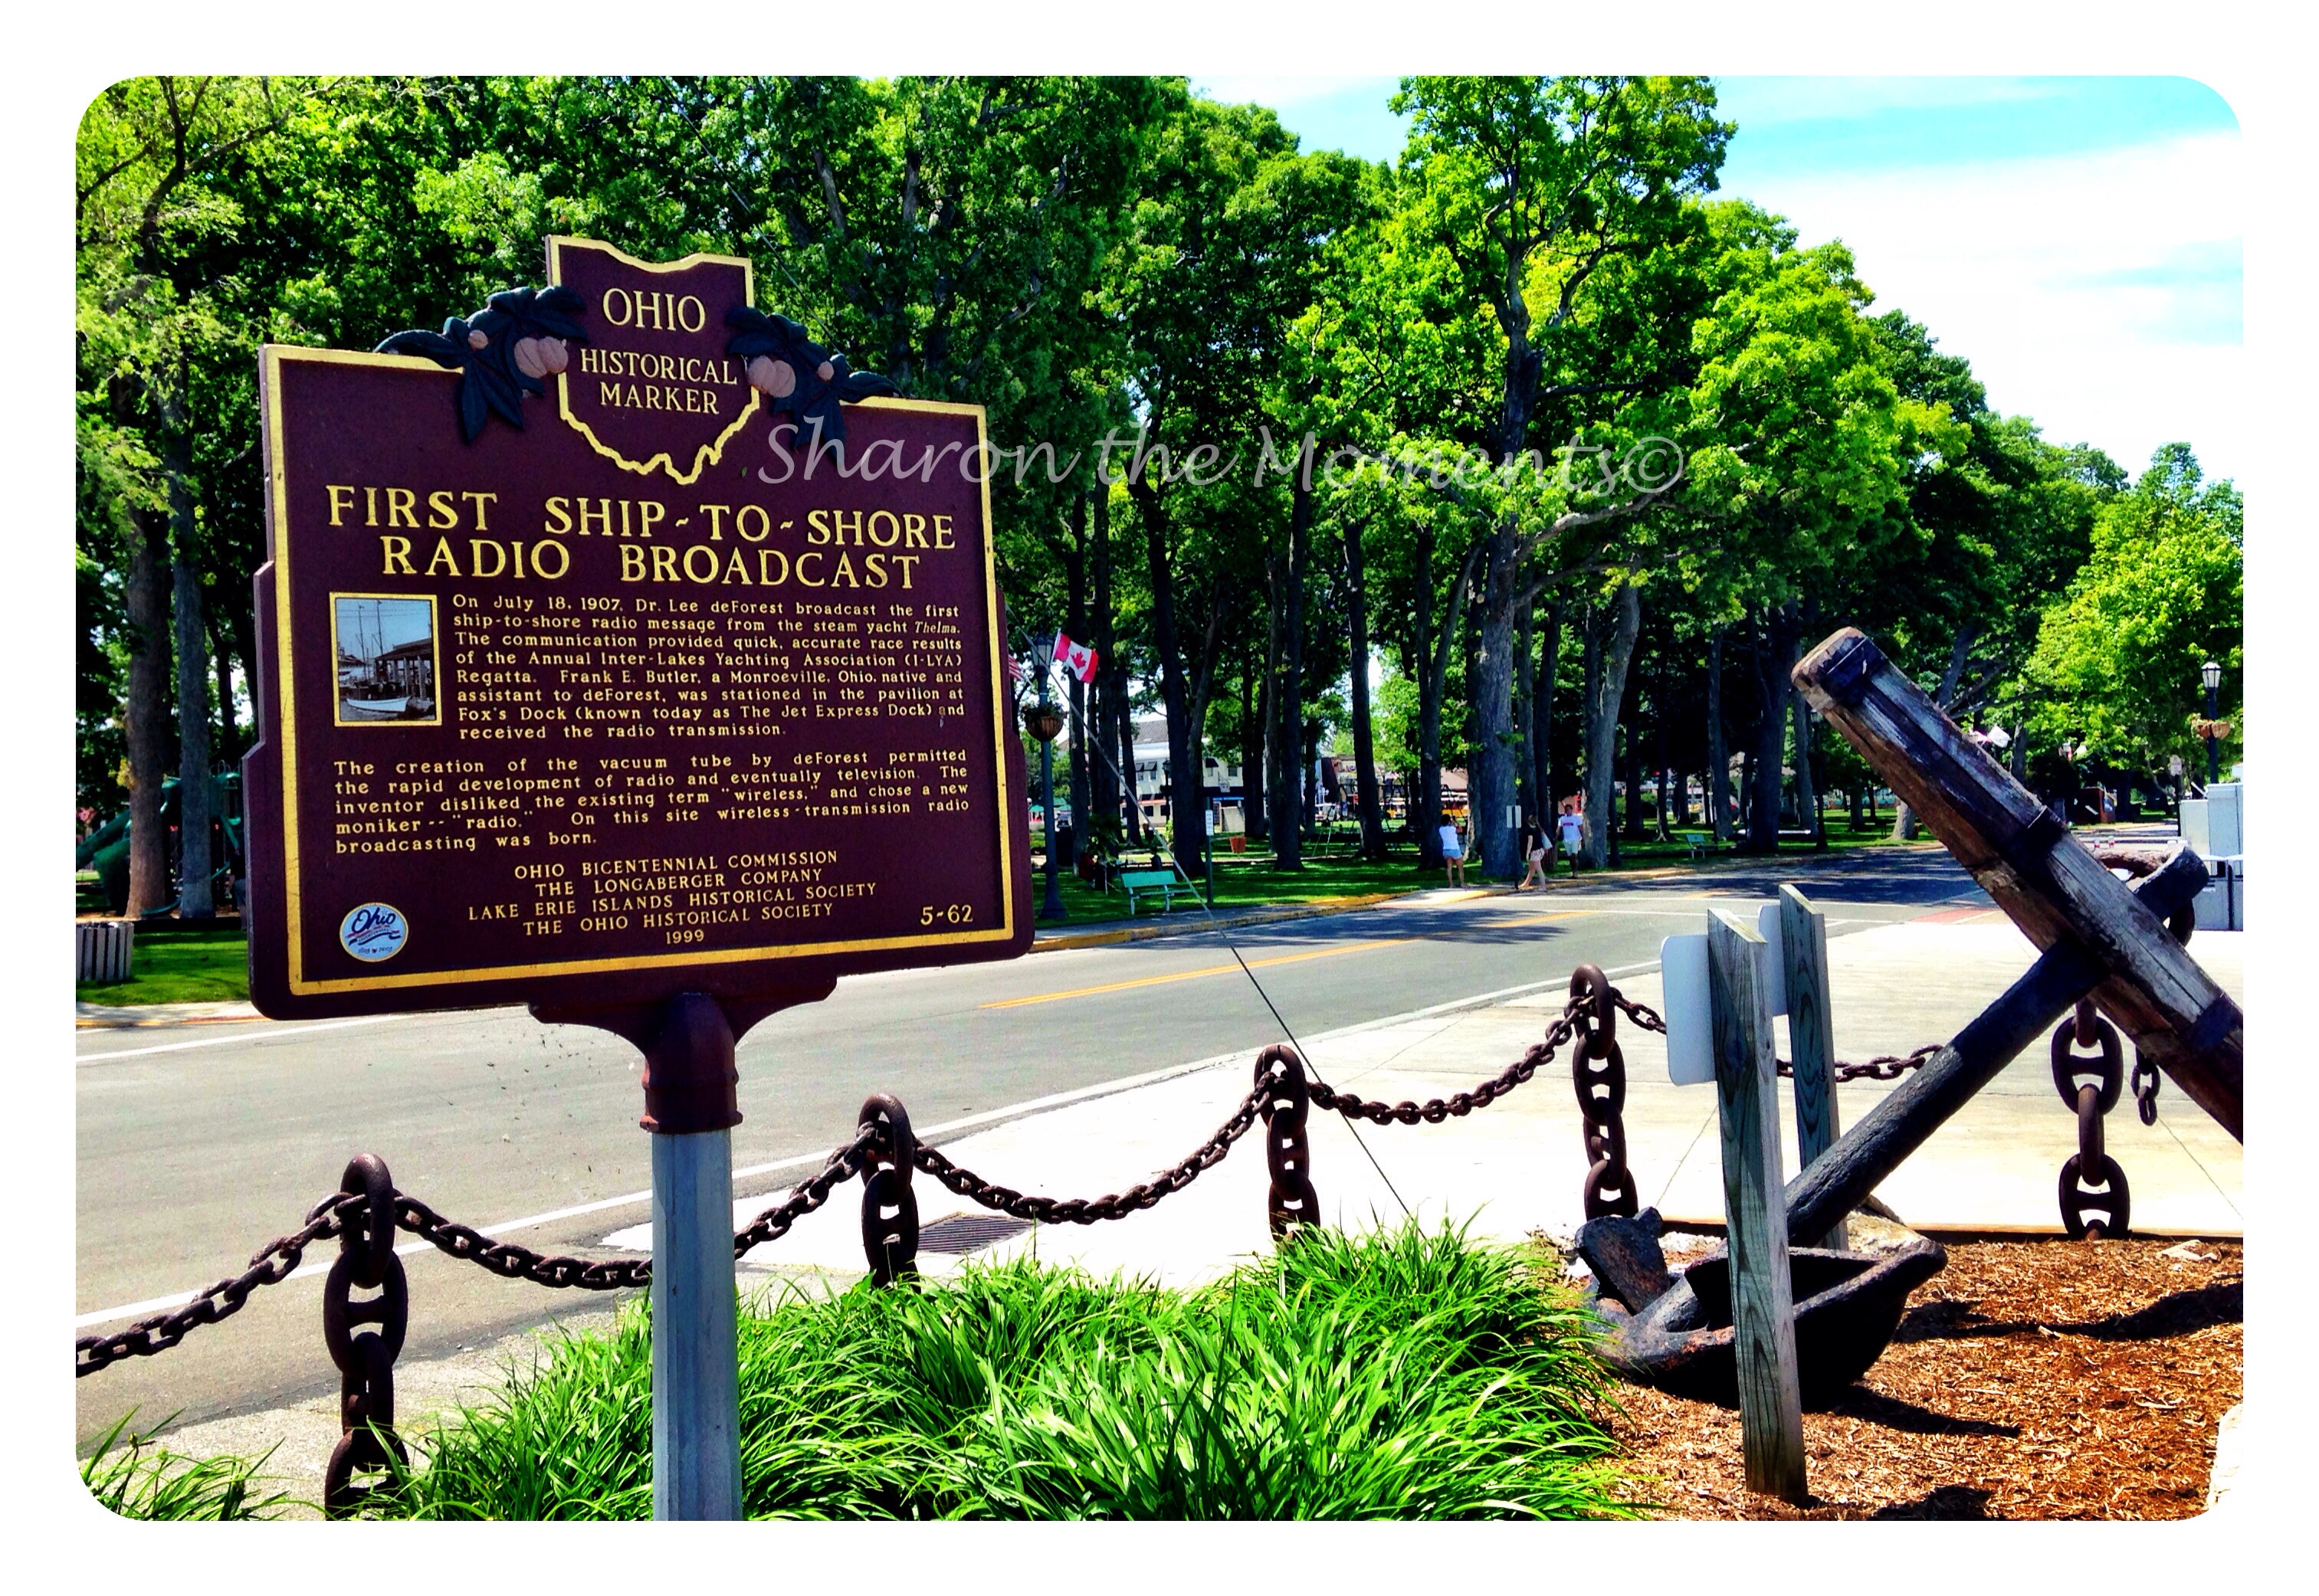 Remarkable Ohio … Ohio Historical Marker #5-62 First Ship-to-Shore Radio Broadcast